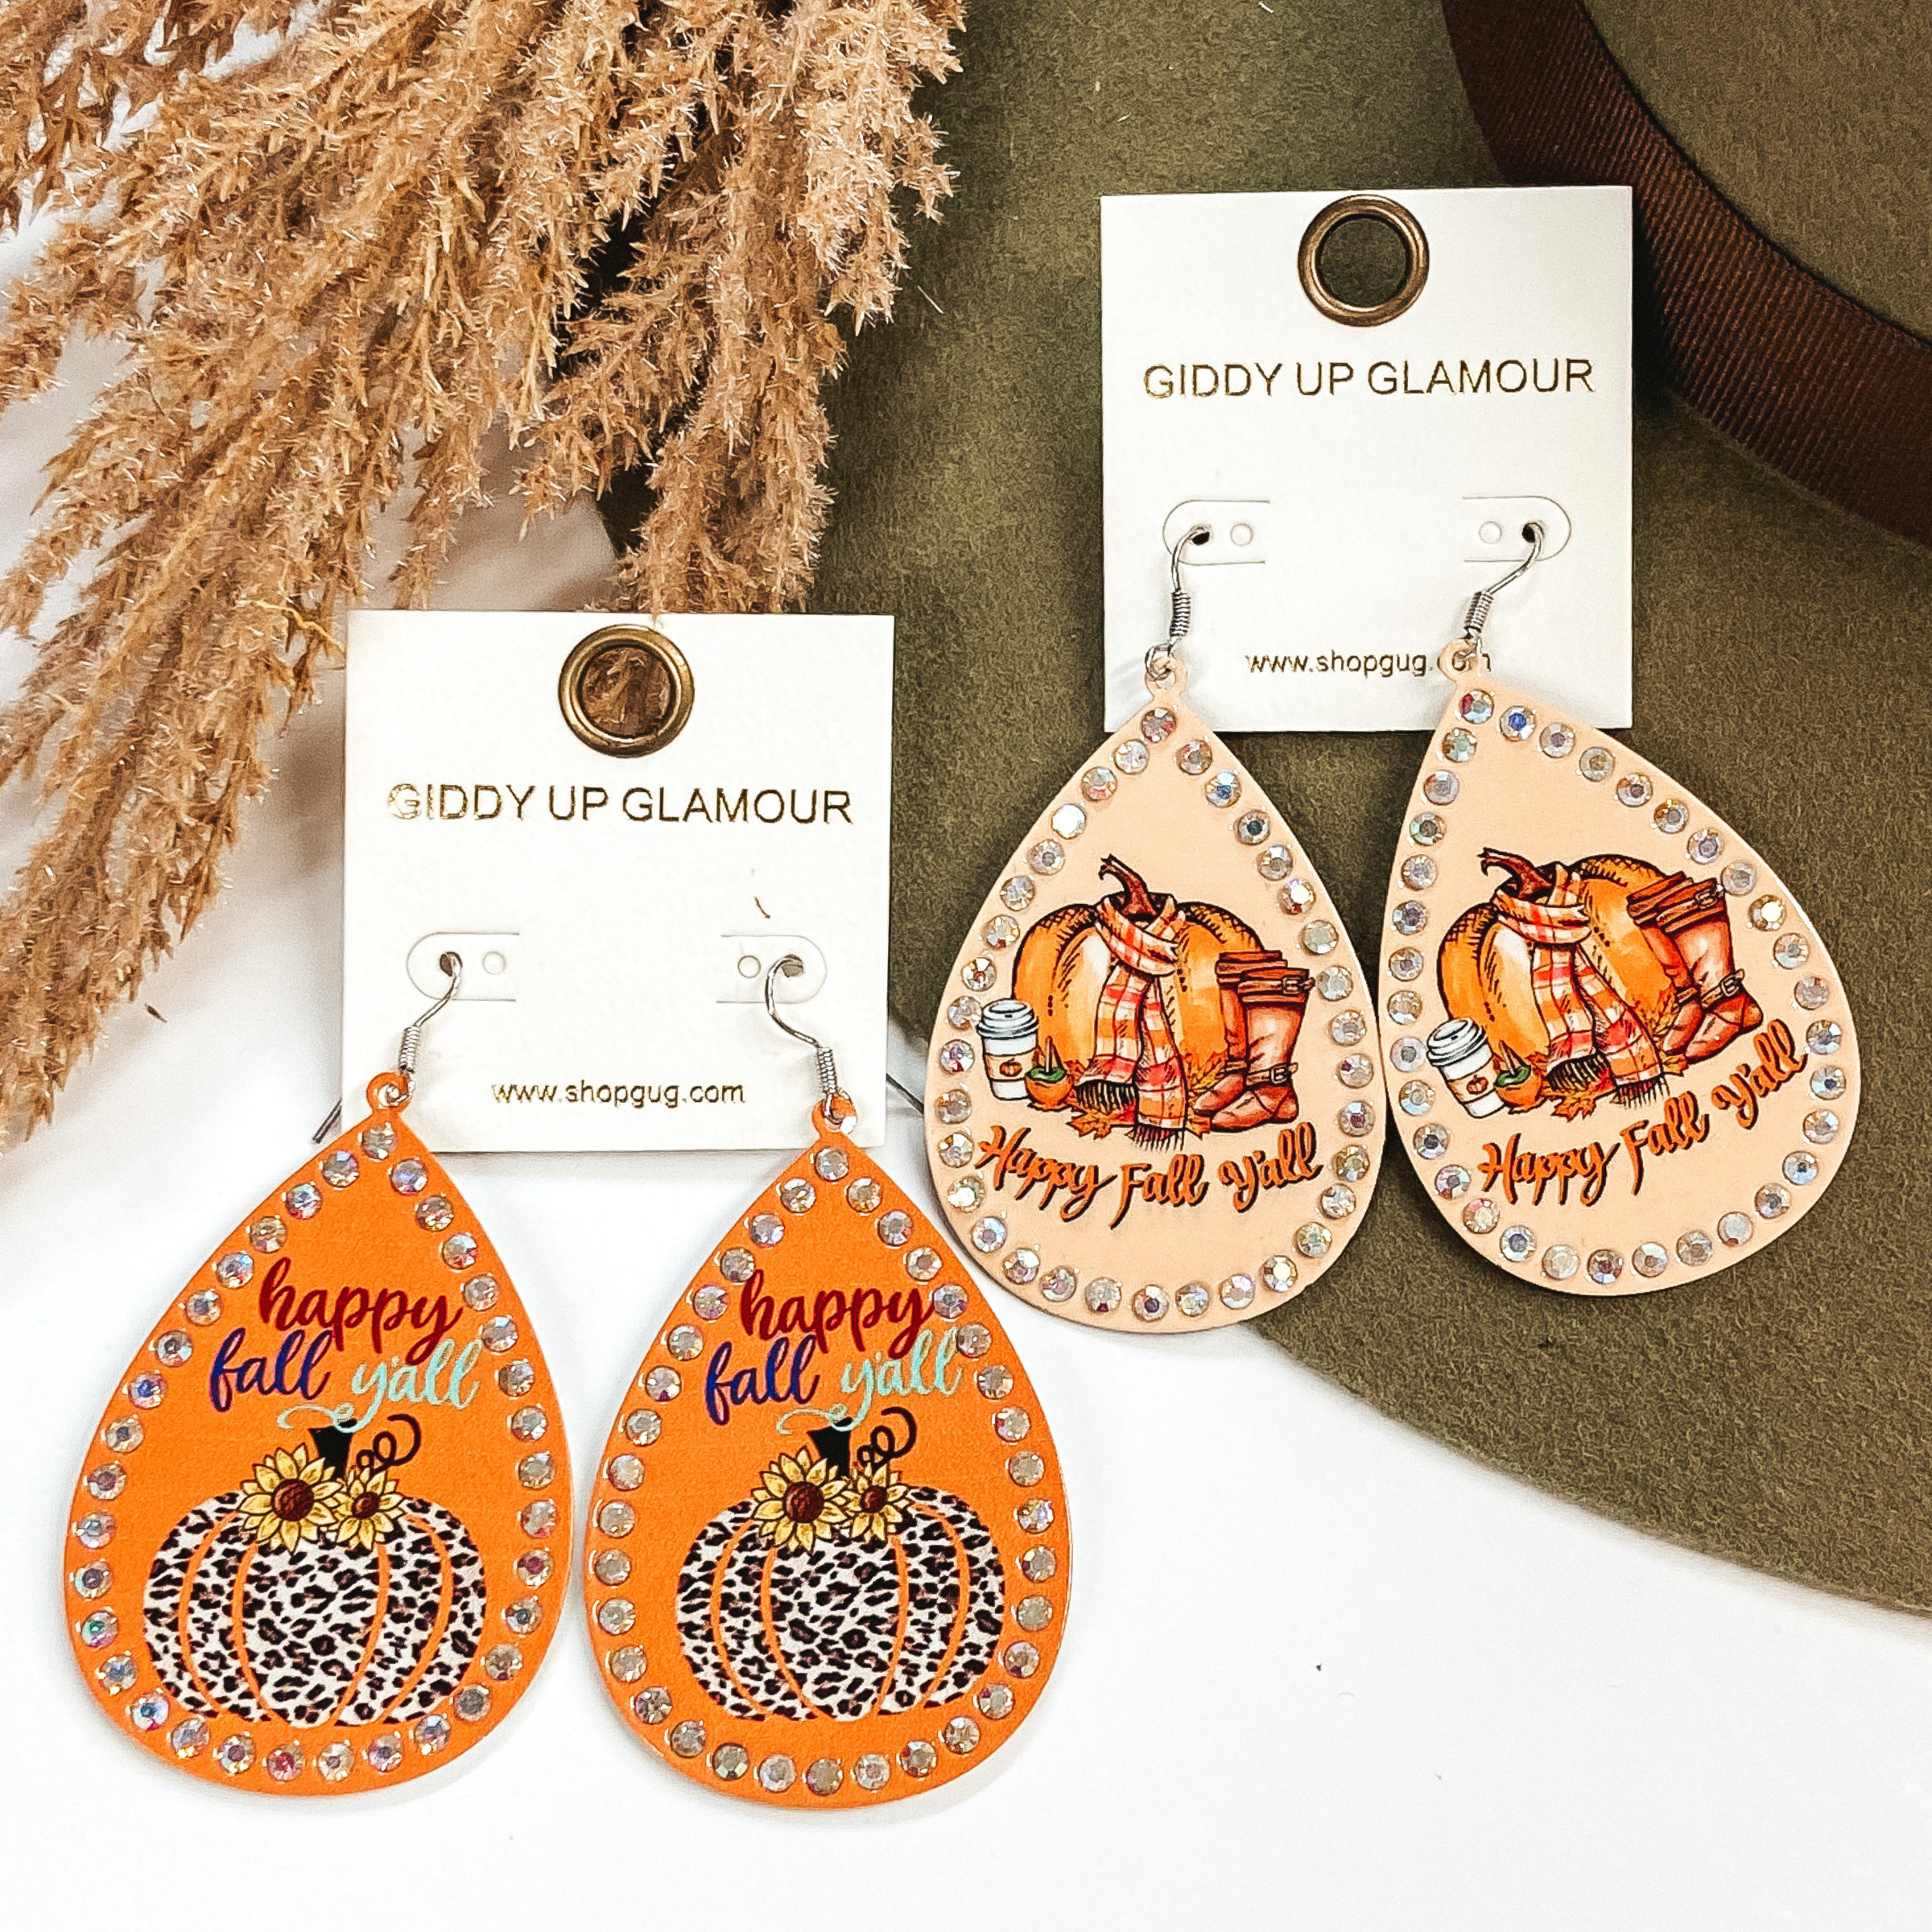 Happy Fall Y'all Teardrop Earrings in Orange with AB Crystals - Giddy Up Glamour Boutique